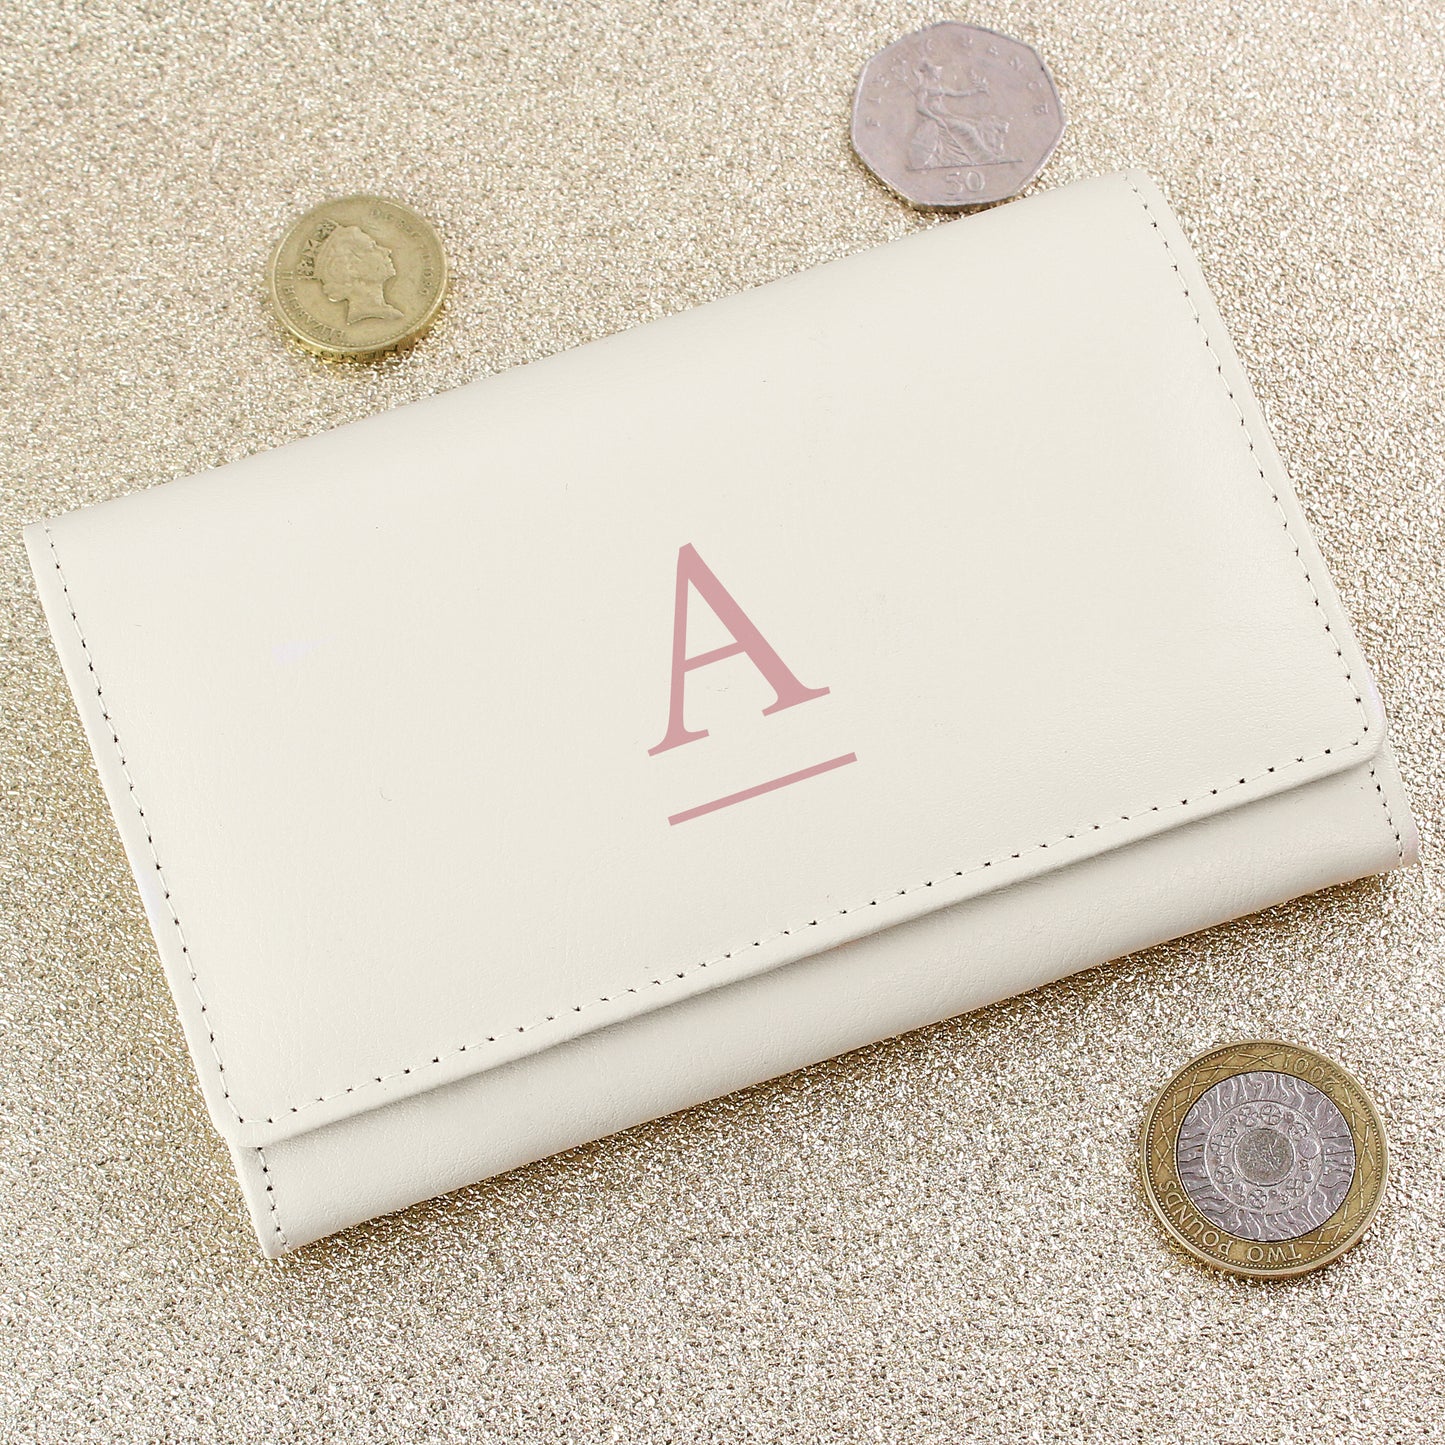 Leather Purse | Personalised Gifts | Initial